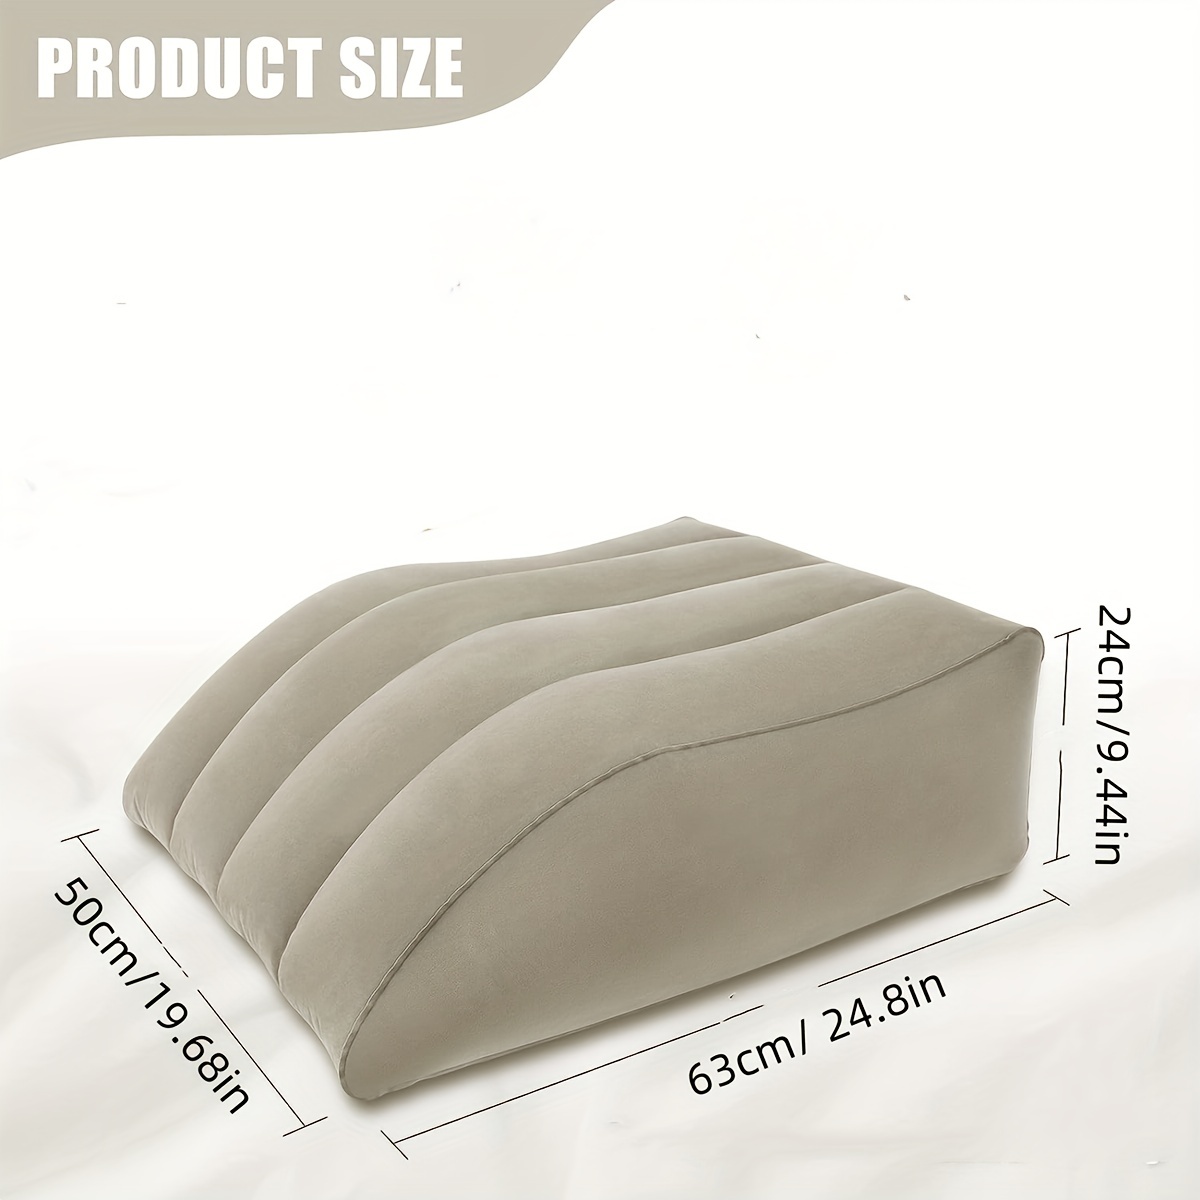 Pvc Flocking Leg Elevation Pillow Inflatable Wedge Pillows, Comfort Leg  Pillows For Sleeping Leg & Back Pain Relief, Leg Support Pillow Leg Wedge  Pillows For After Aurgery, Hip, Foot, Ankle Recovery 